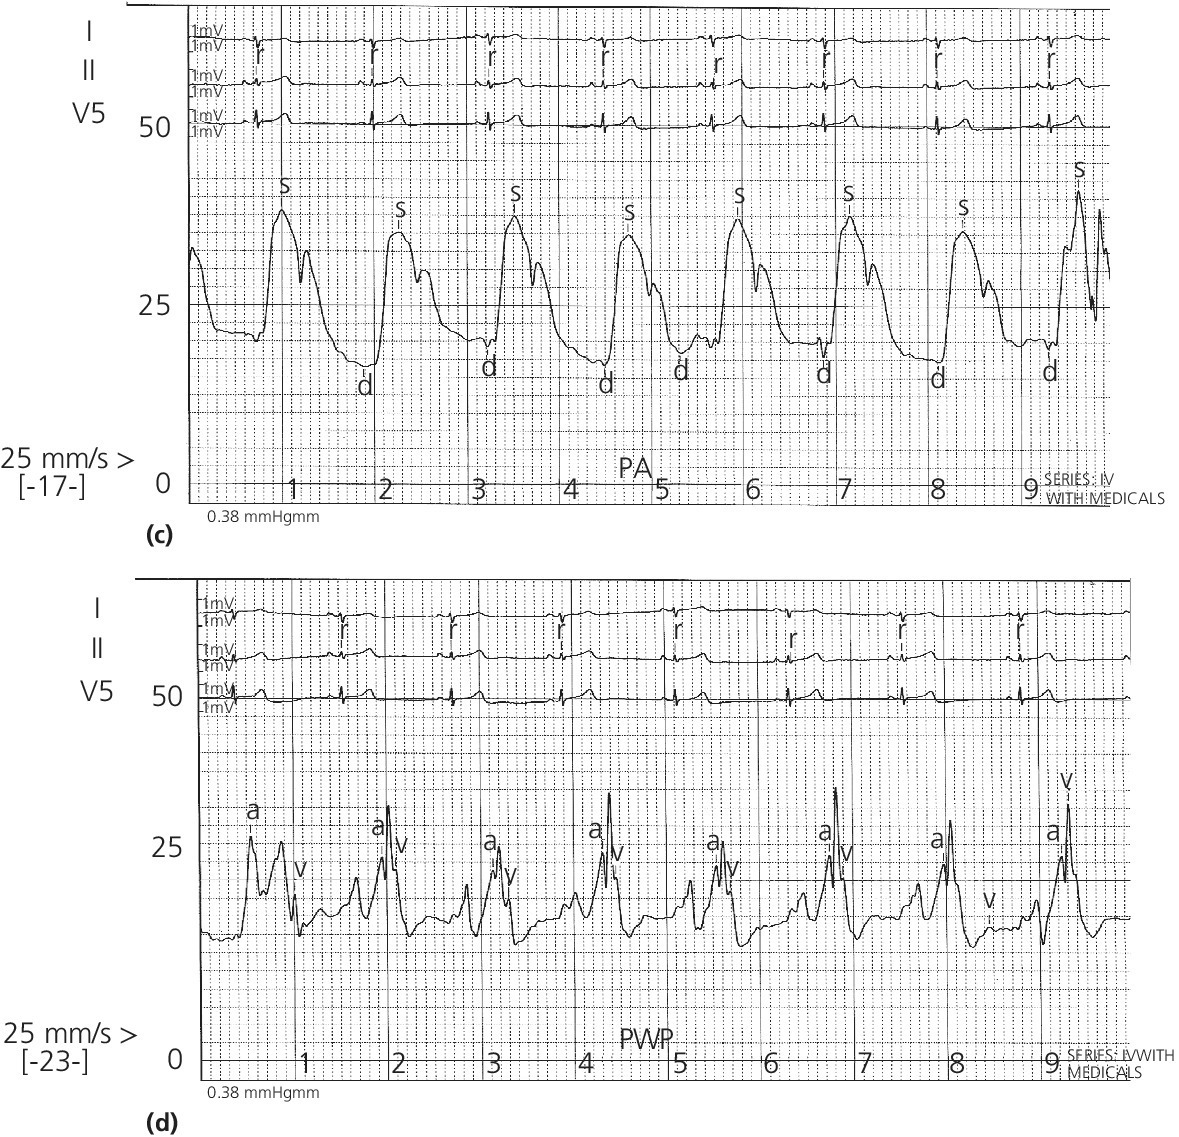 4 ECGs for (from top to bottom) RA, RV, PA, and PWP, displaying pressure tracings encountered during the insertion of a PA catheter.